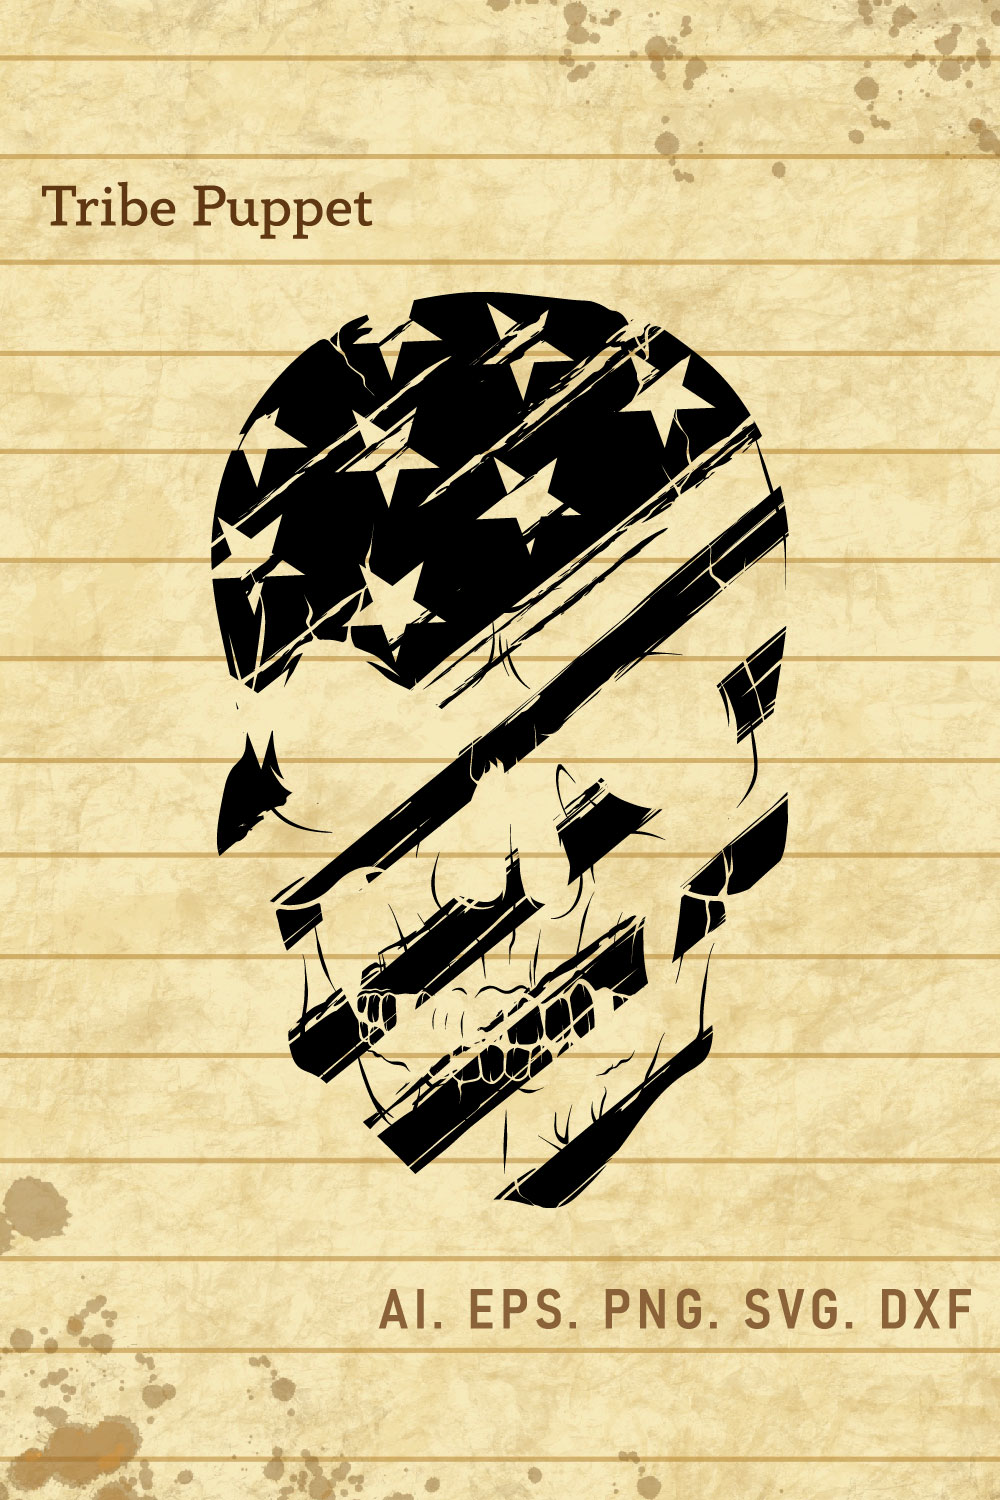 American Flag SVG pinterest preview image.